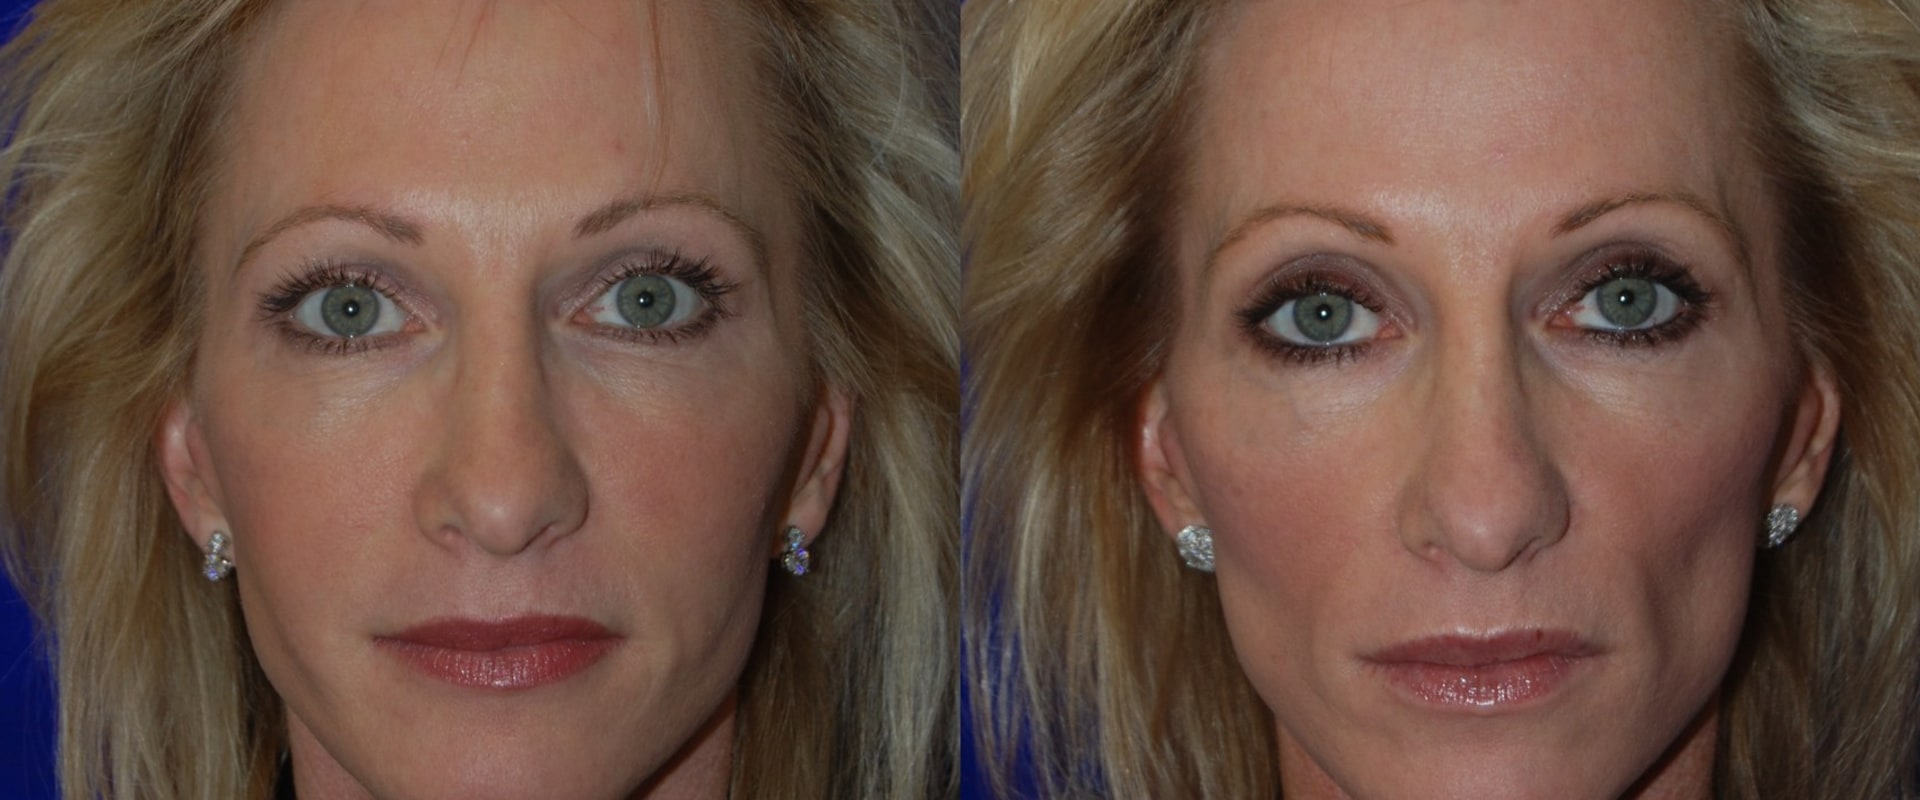 When Will I See Results from Juvederm?